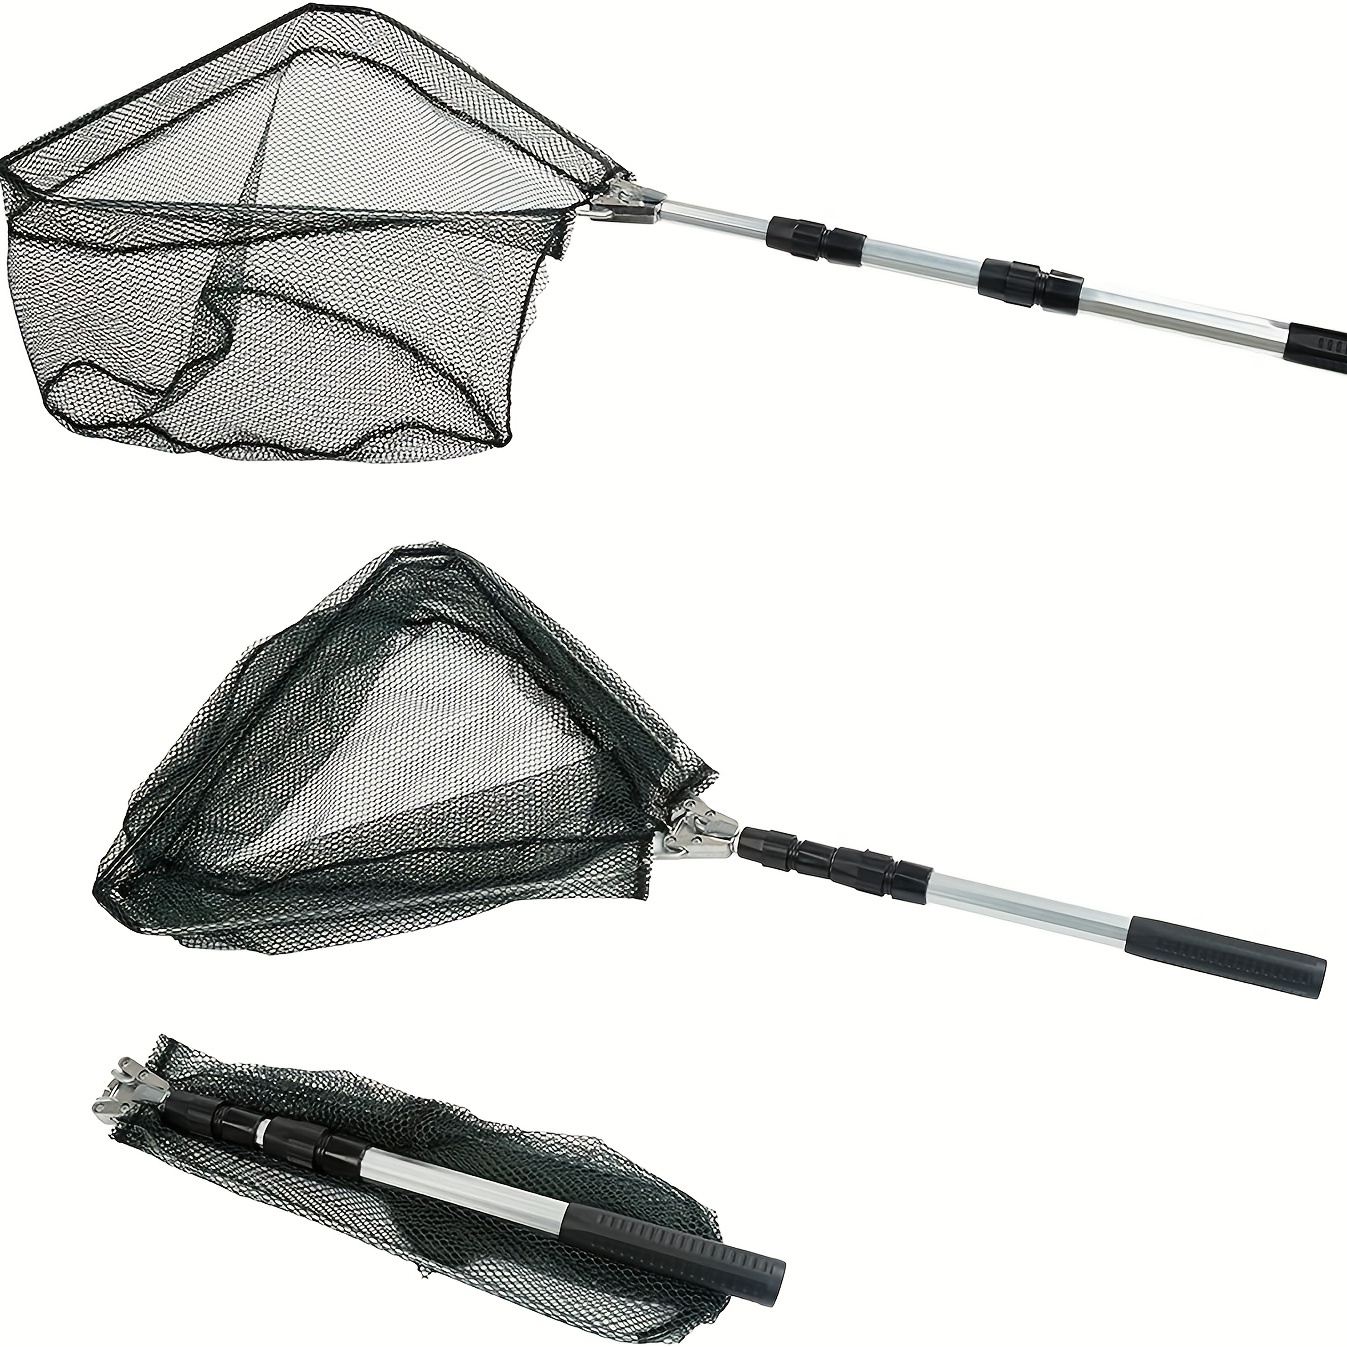 Telescoping Aluminum Fishing Landing Net - Ideal for Freshwater and  Saltwater Fishing, Lightweight and Durable